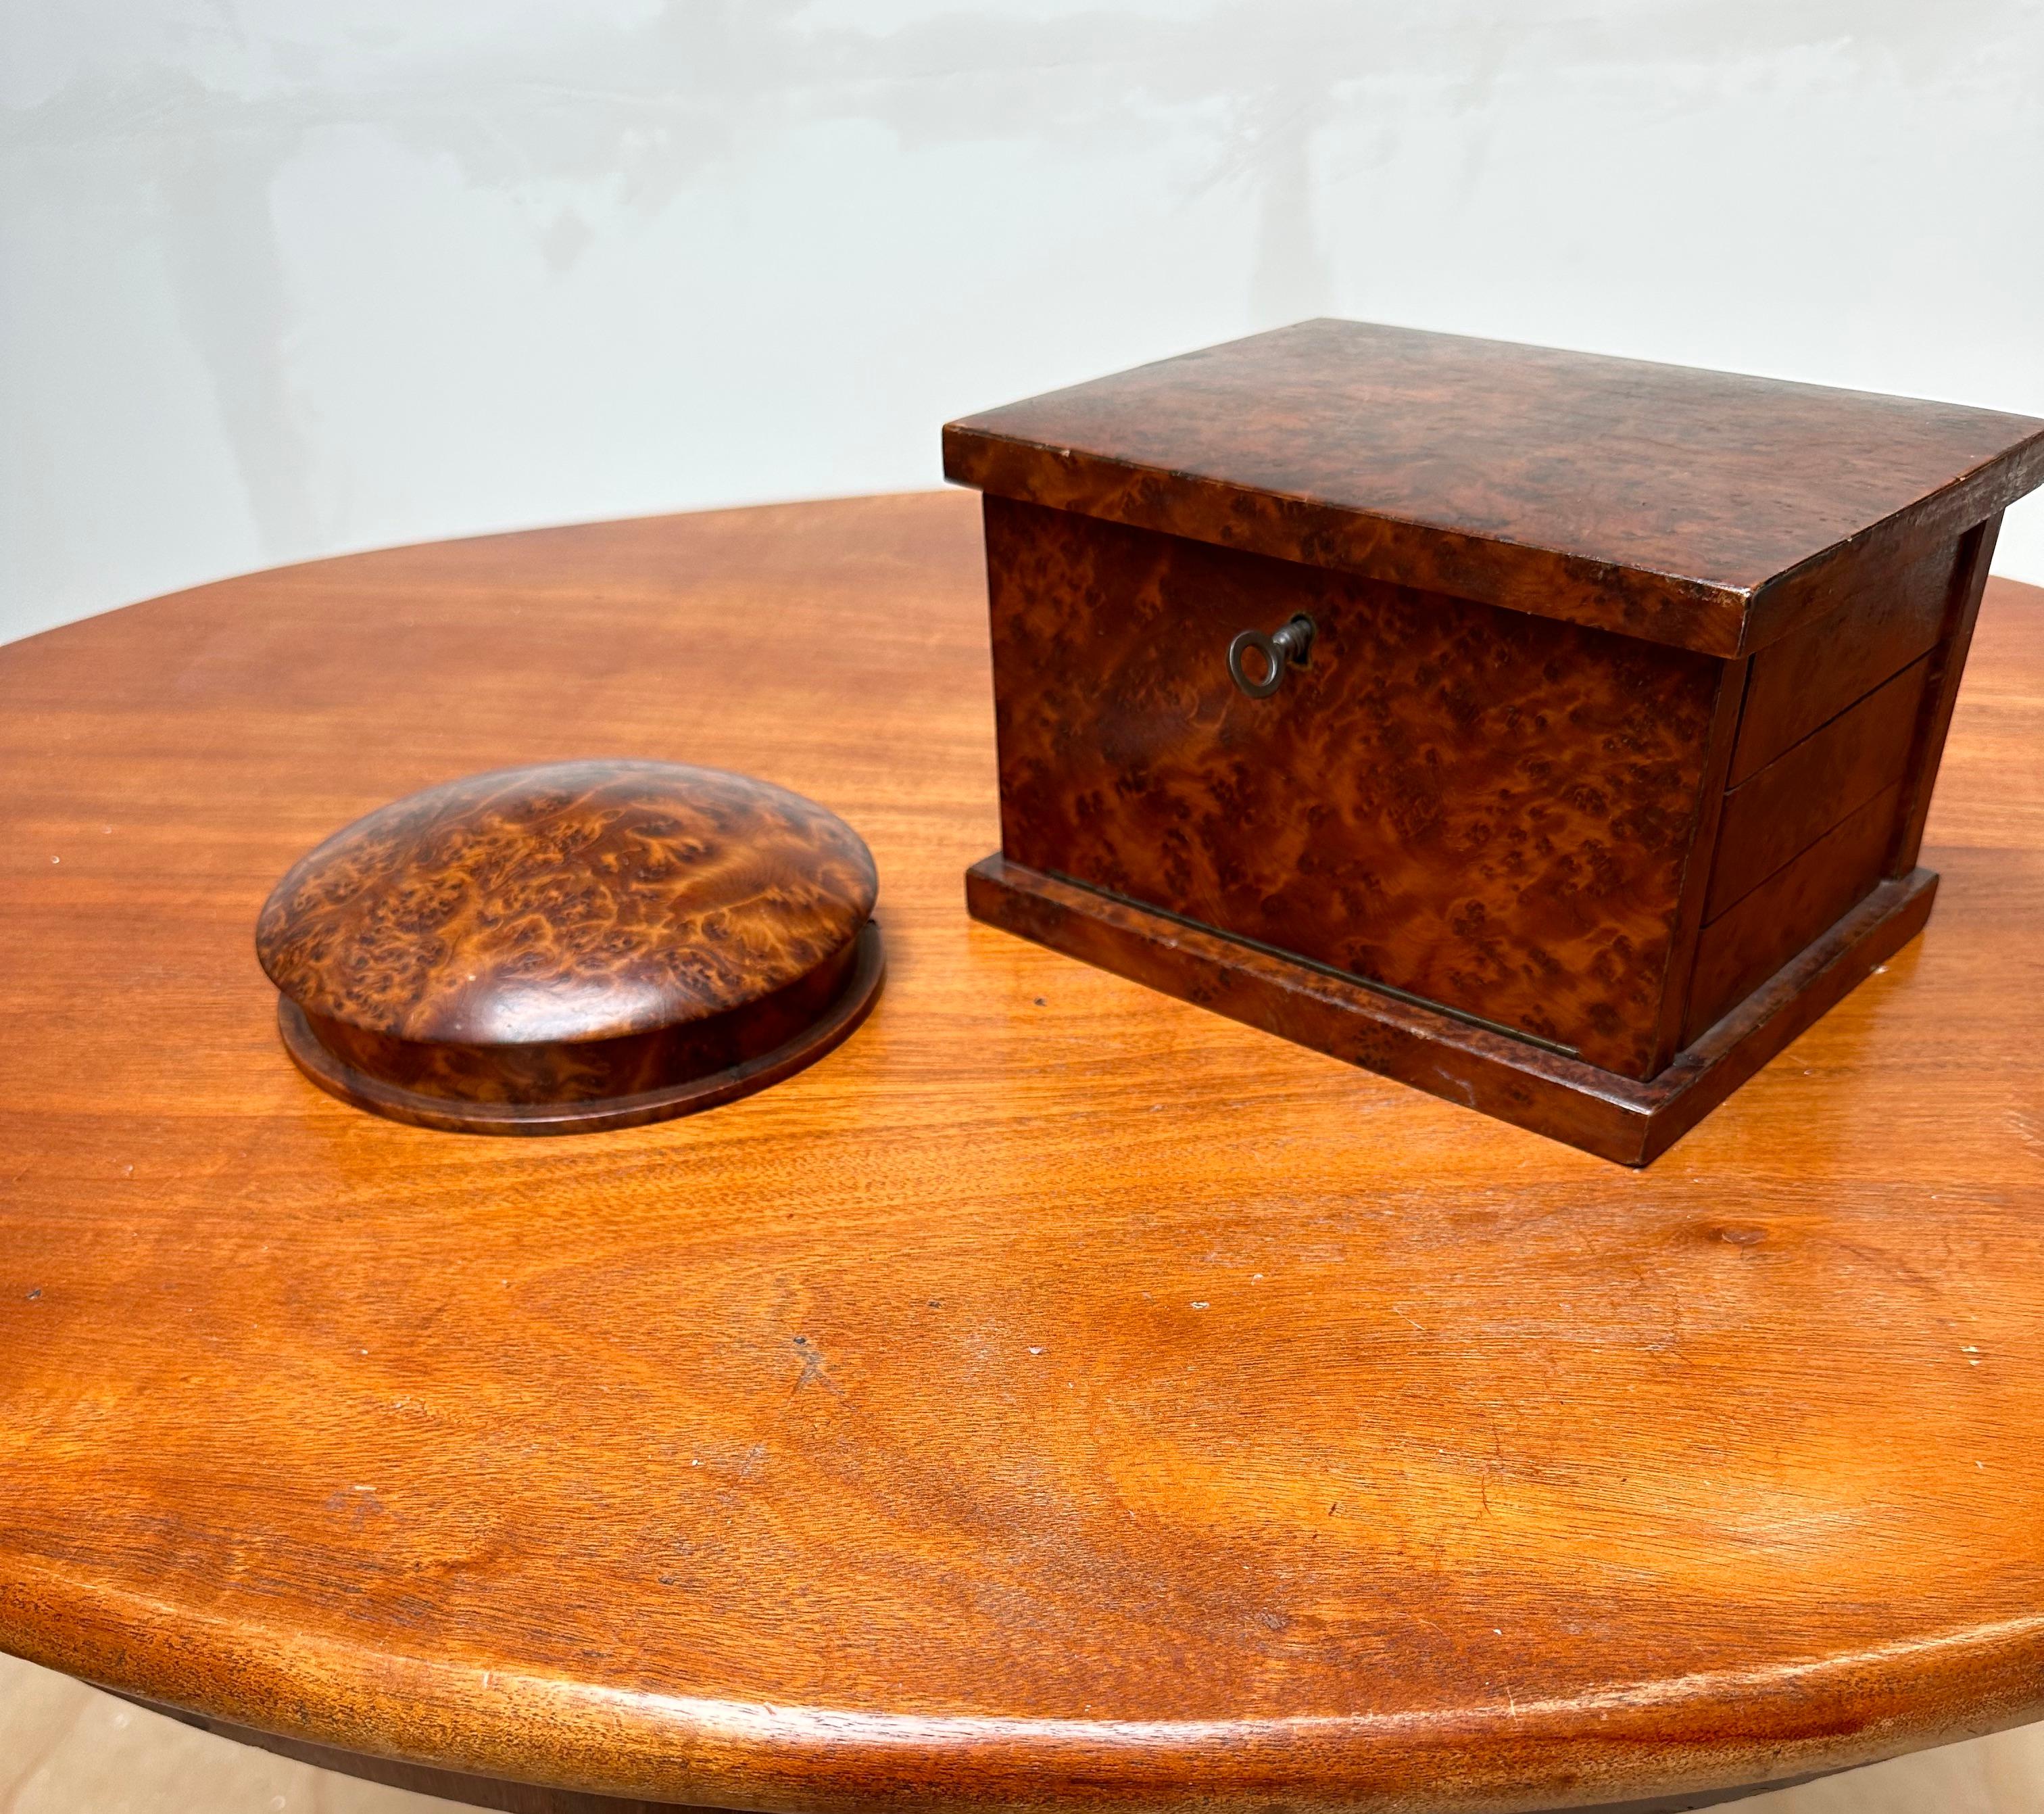 Clever and perfect condition 'pair' of antique jewelry boxes.

The burl or burr walnut that was used to create these two stunning boxes has delivered the most amazing details and patterns both on the exterior and interior and this exotic wood also